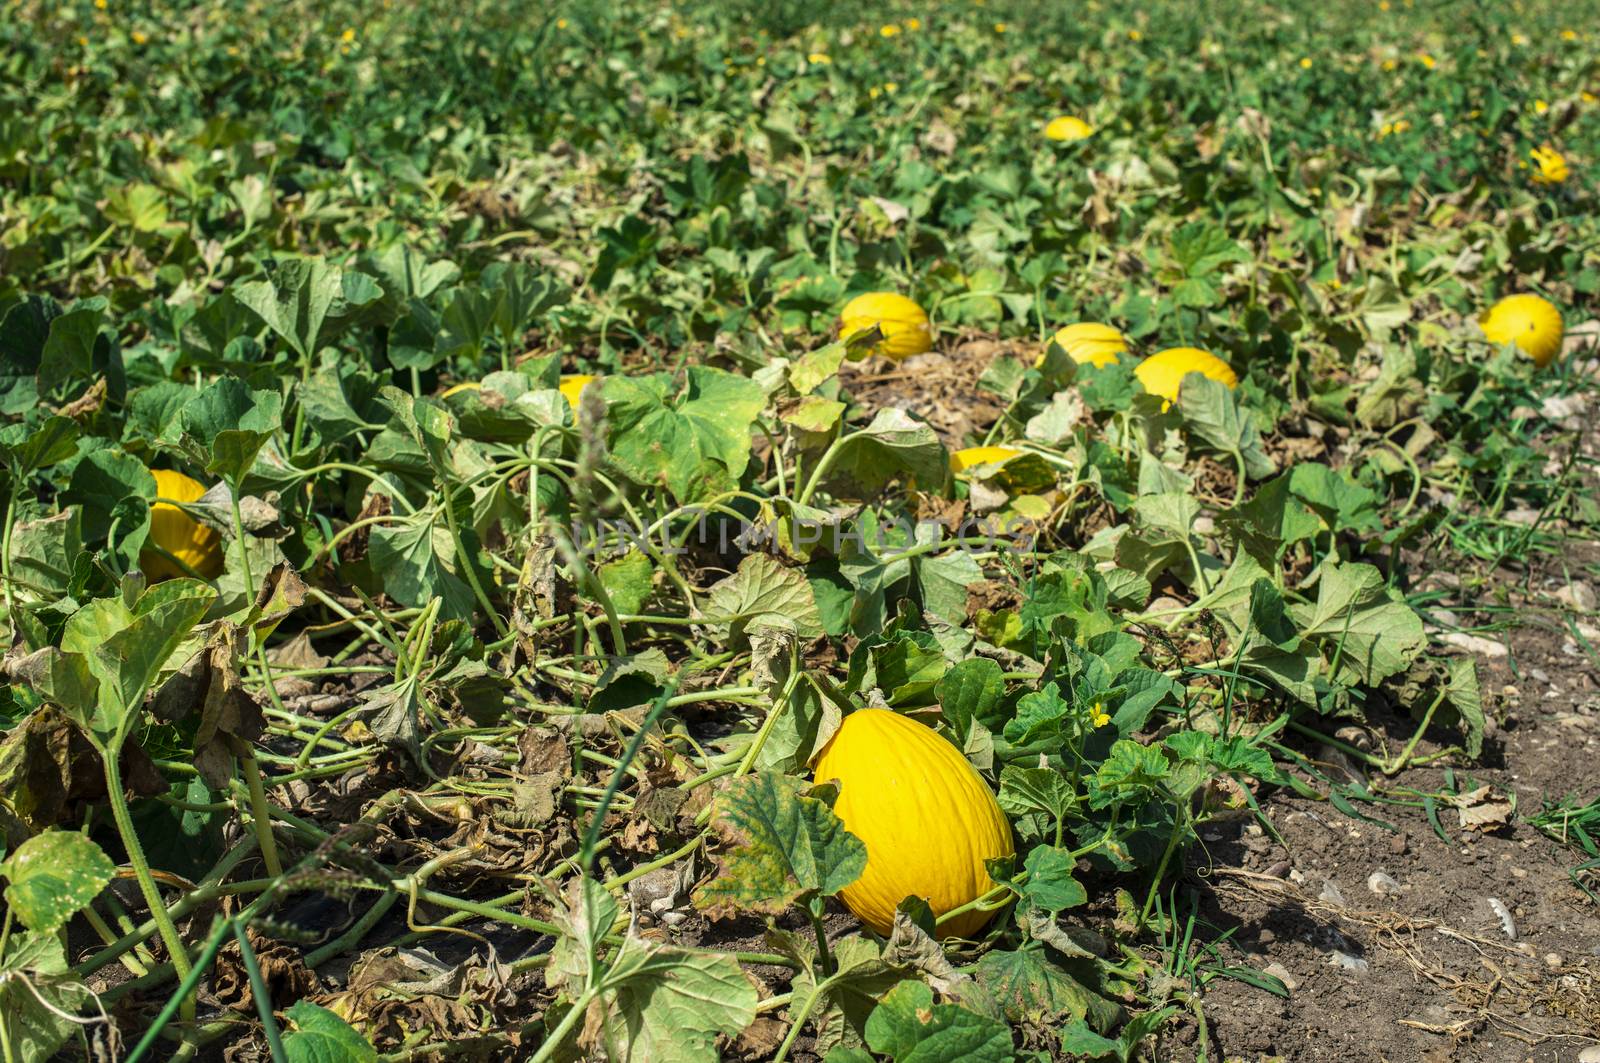 Melons in the field. Sunny day. Plantation with yellow melons in by deyan_georgiev